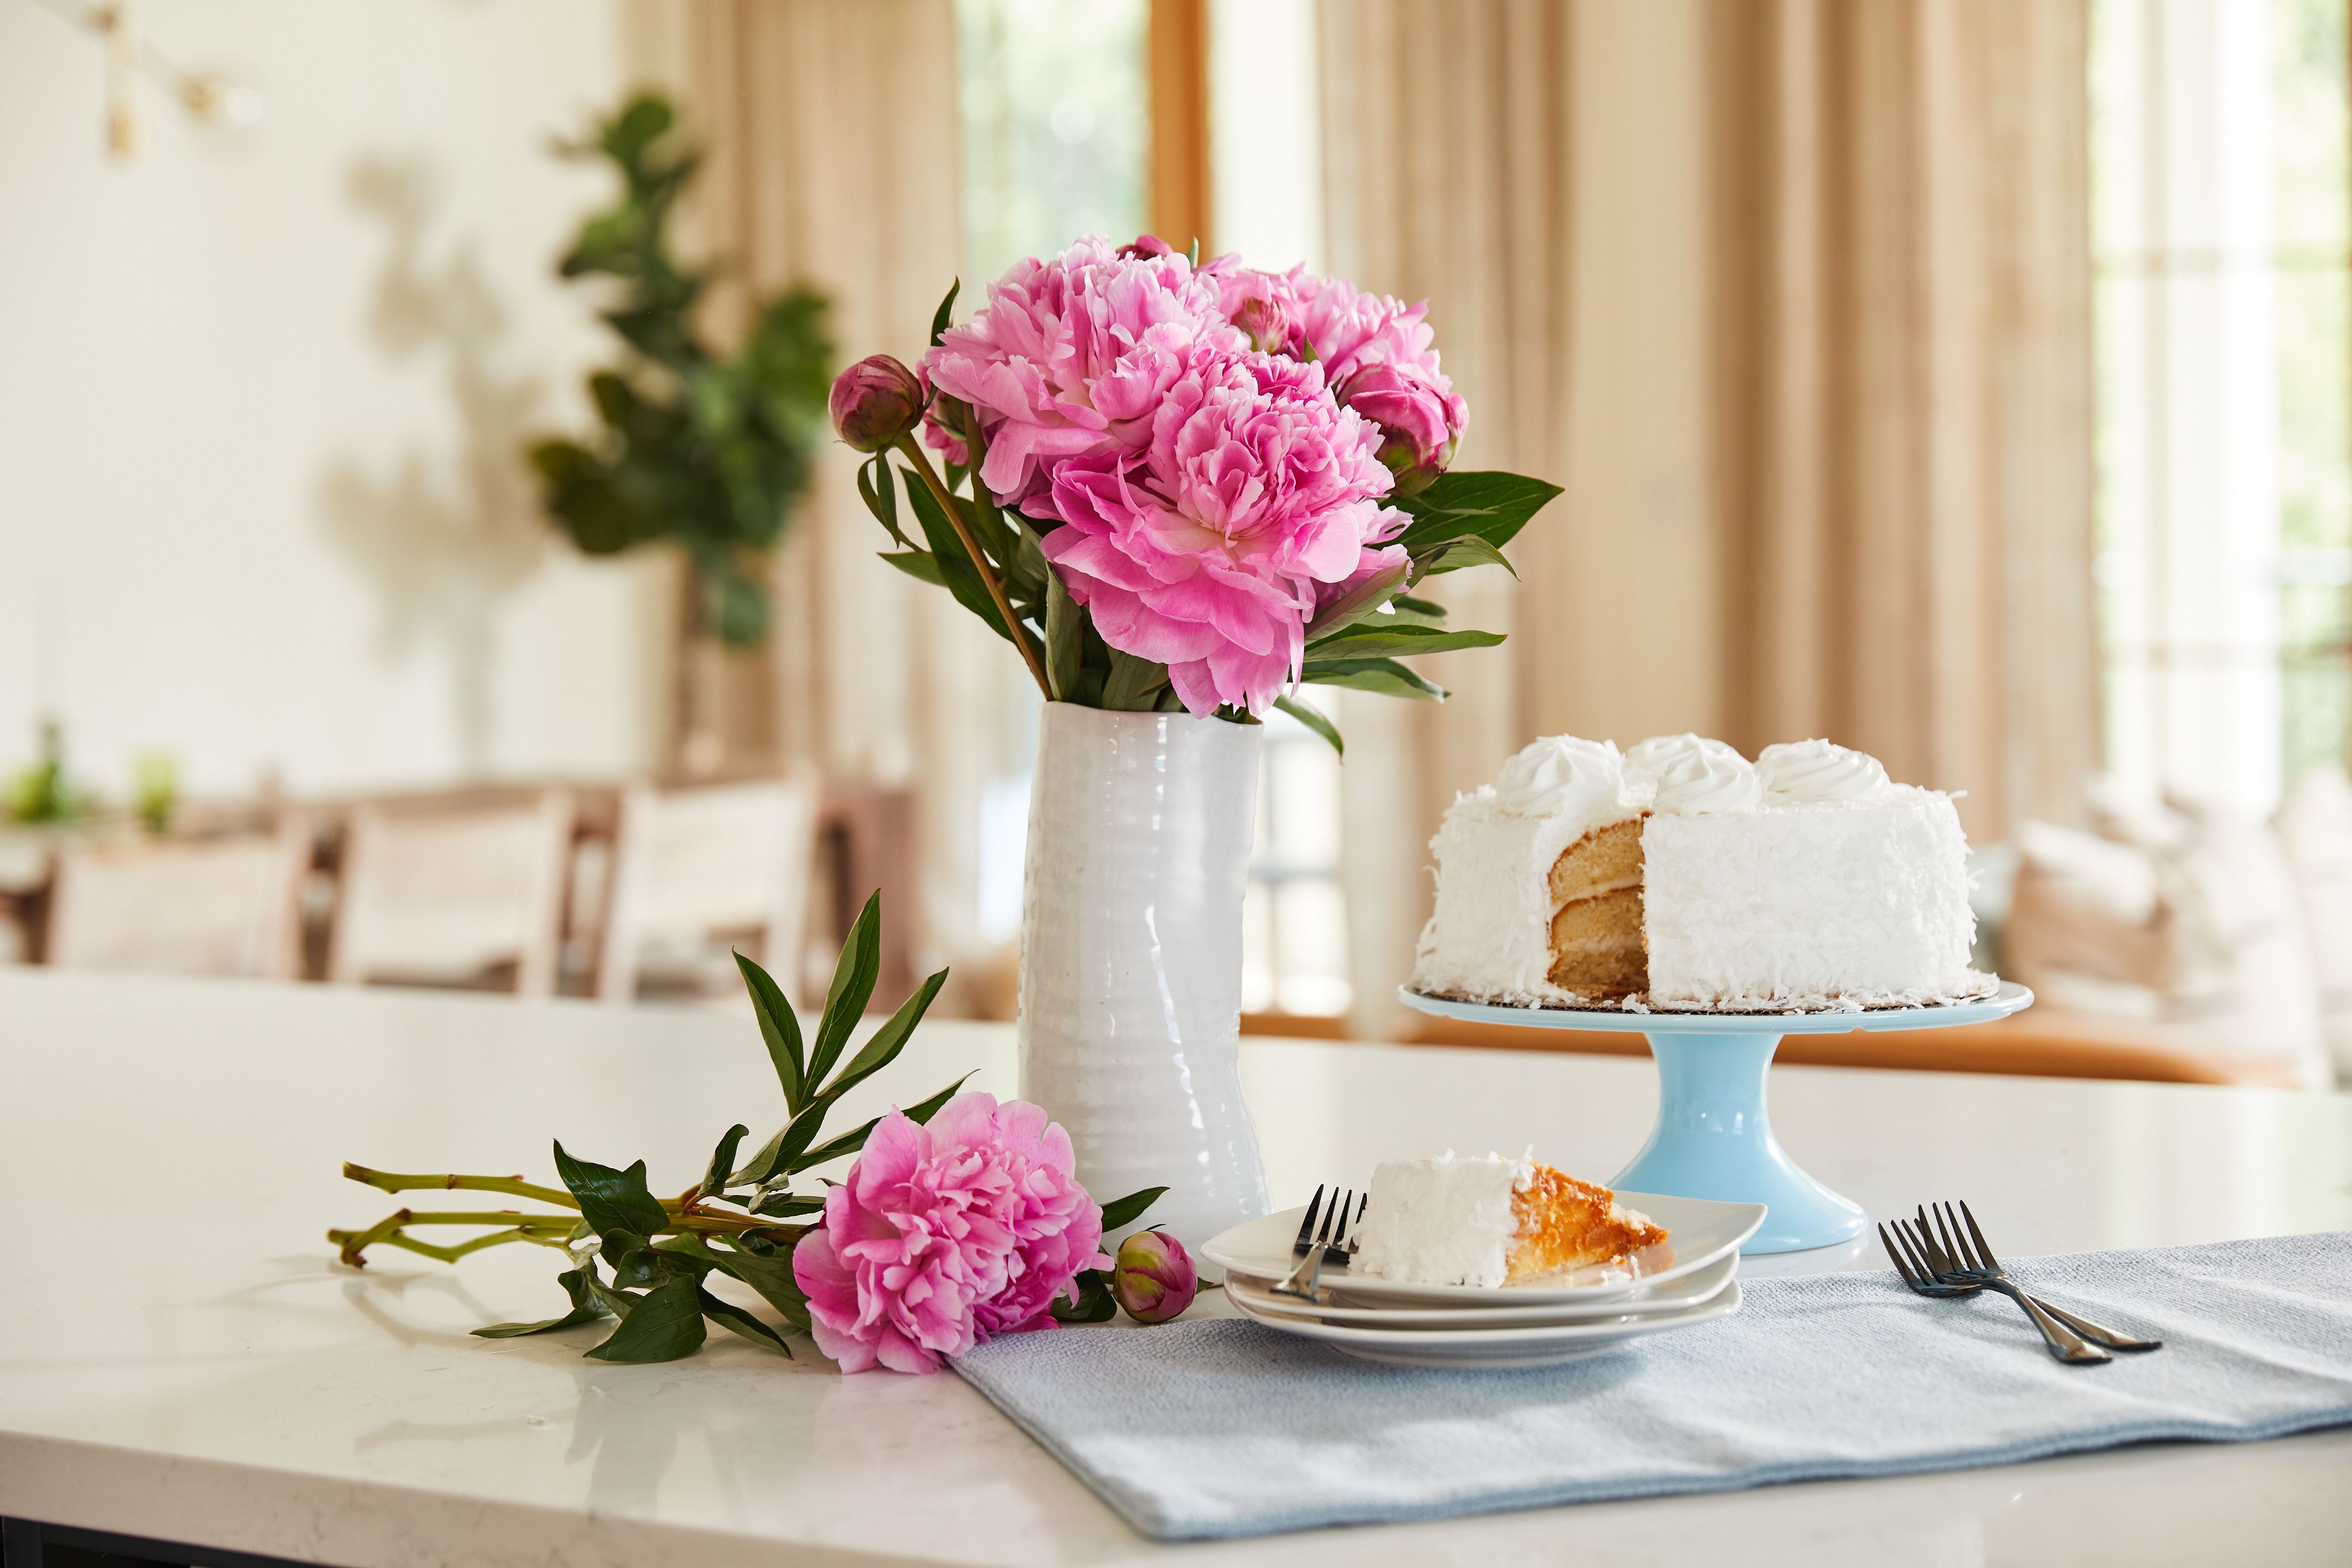 Pink peonies arranged in a white vase on a table with cake